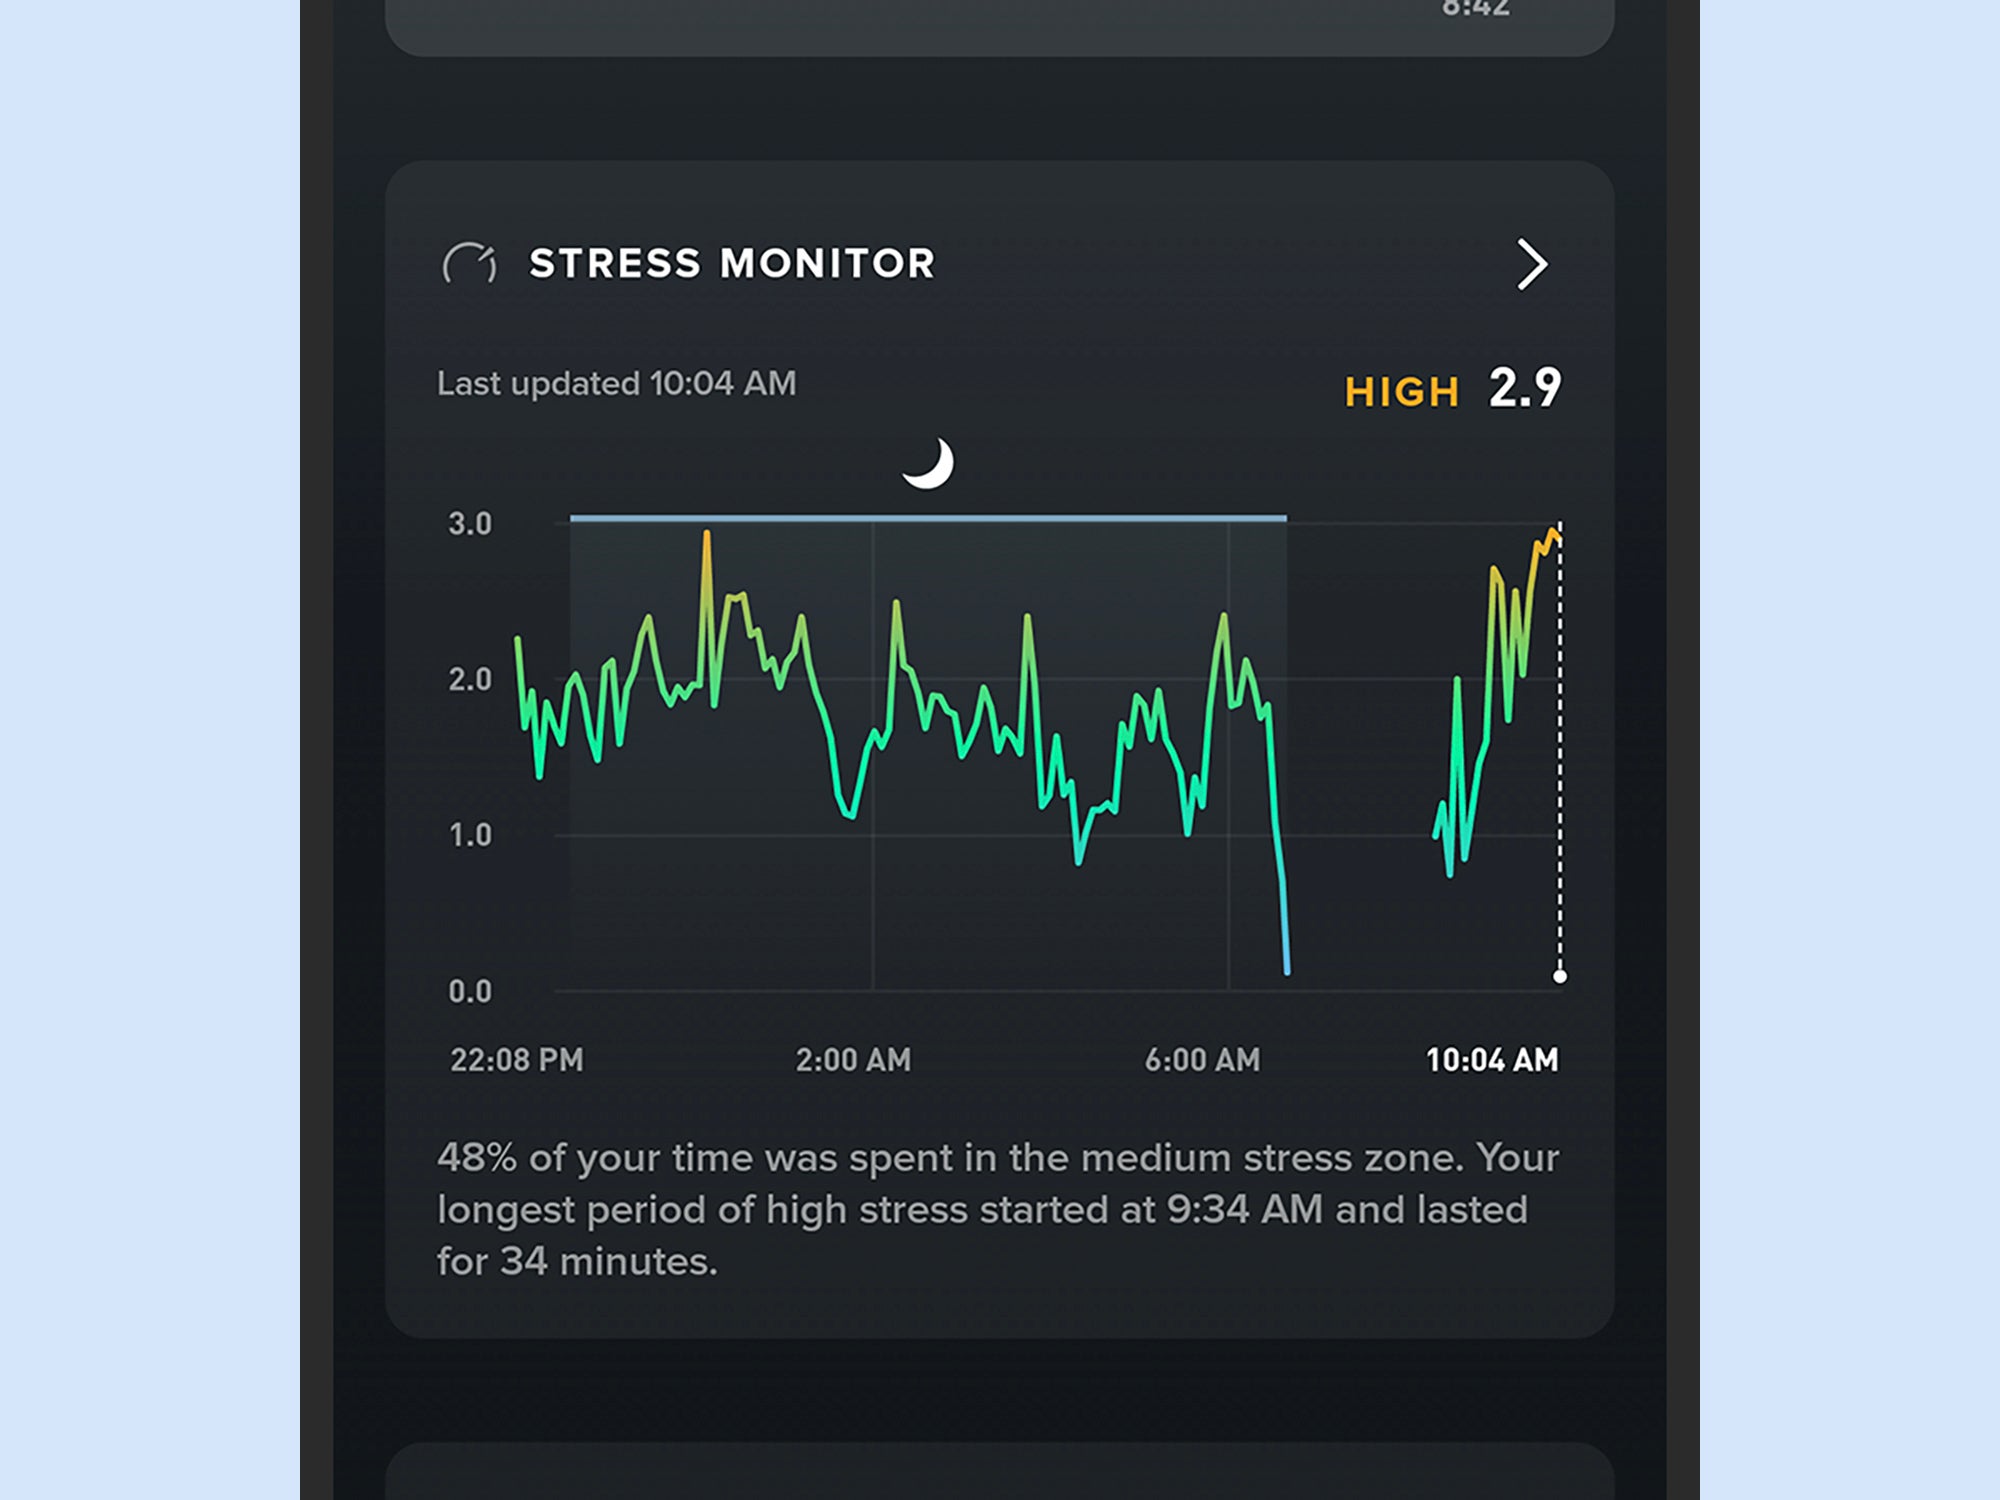 The Stress monitor on the Whoop will tell you about your stress levels in the last 12 hours.